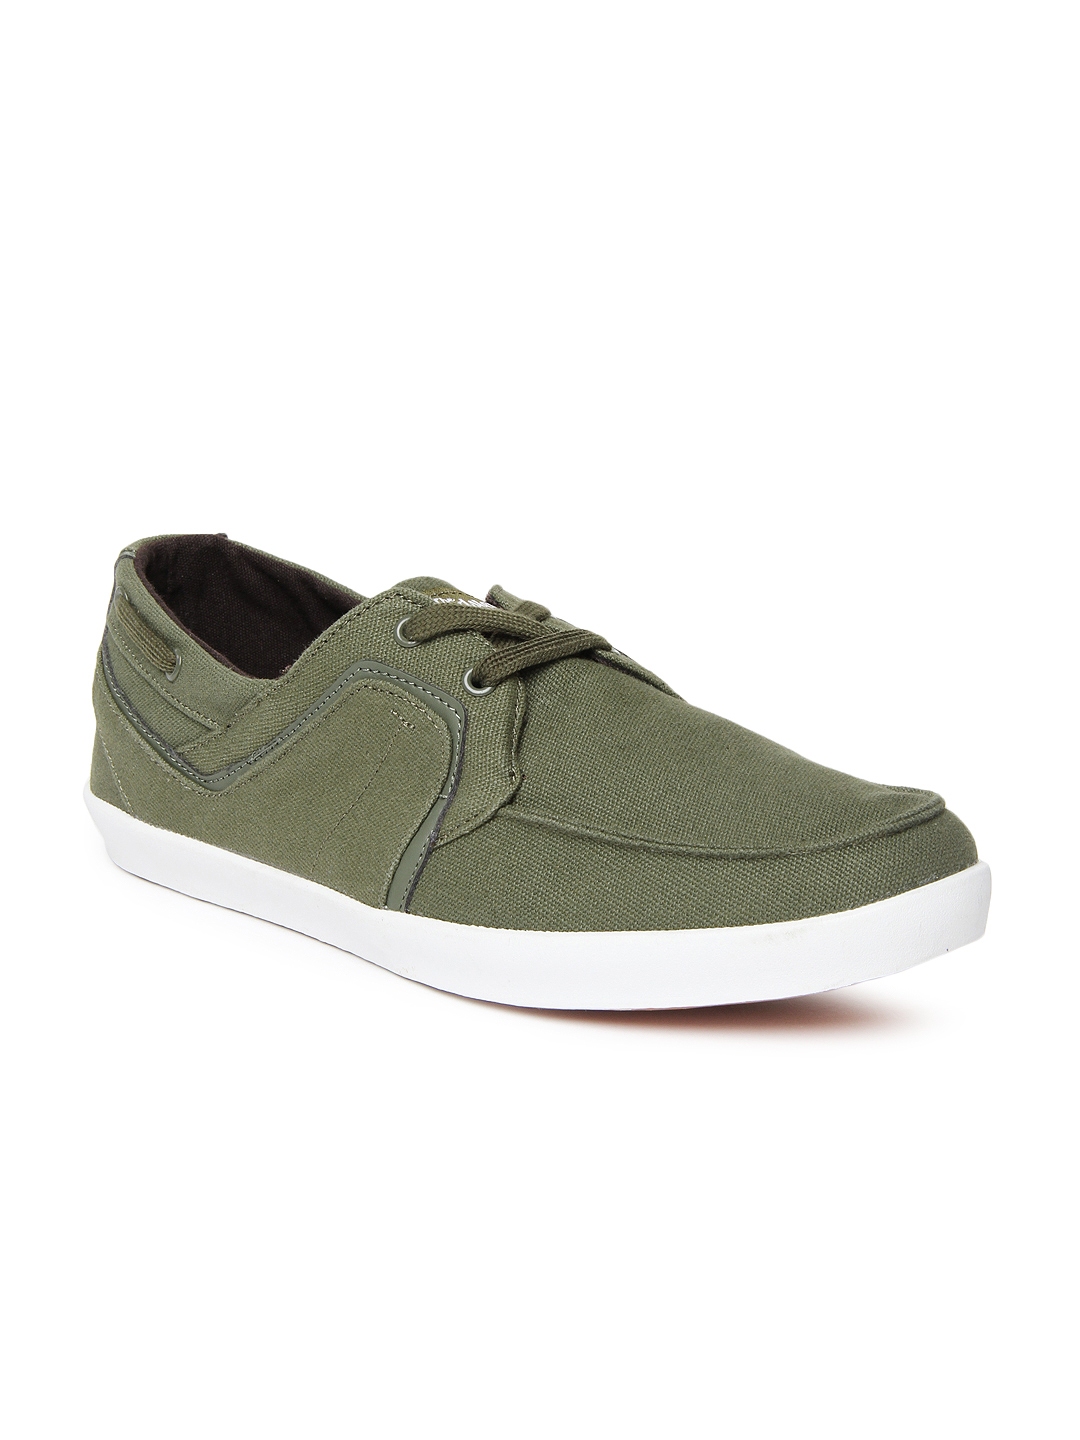 Buy Roadster Men Green Casual Shoes - Casual Shoes for Men 419419 | Myntra